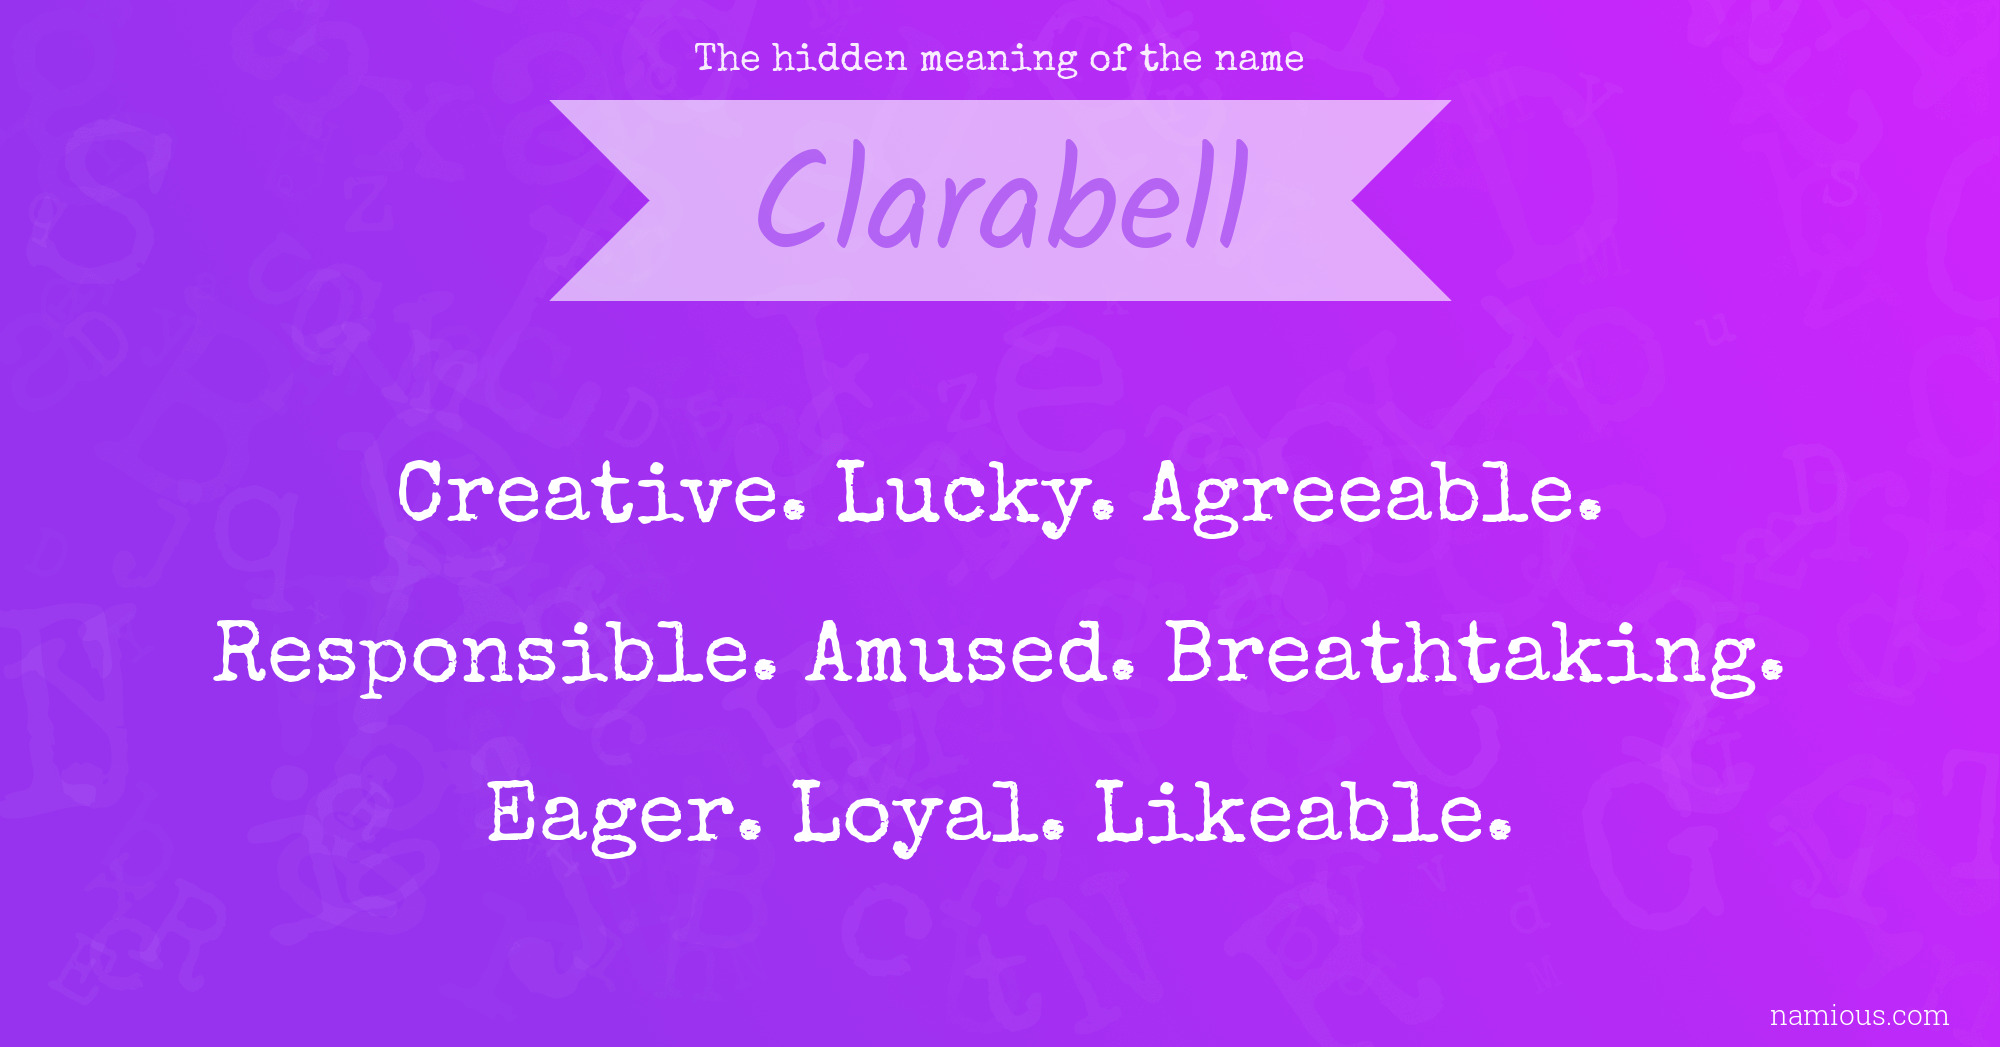 The hidden meaning of the name Clarabell